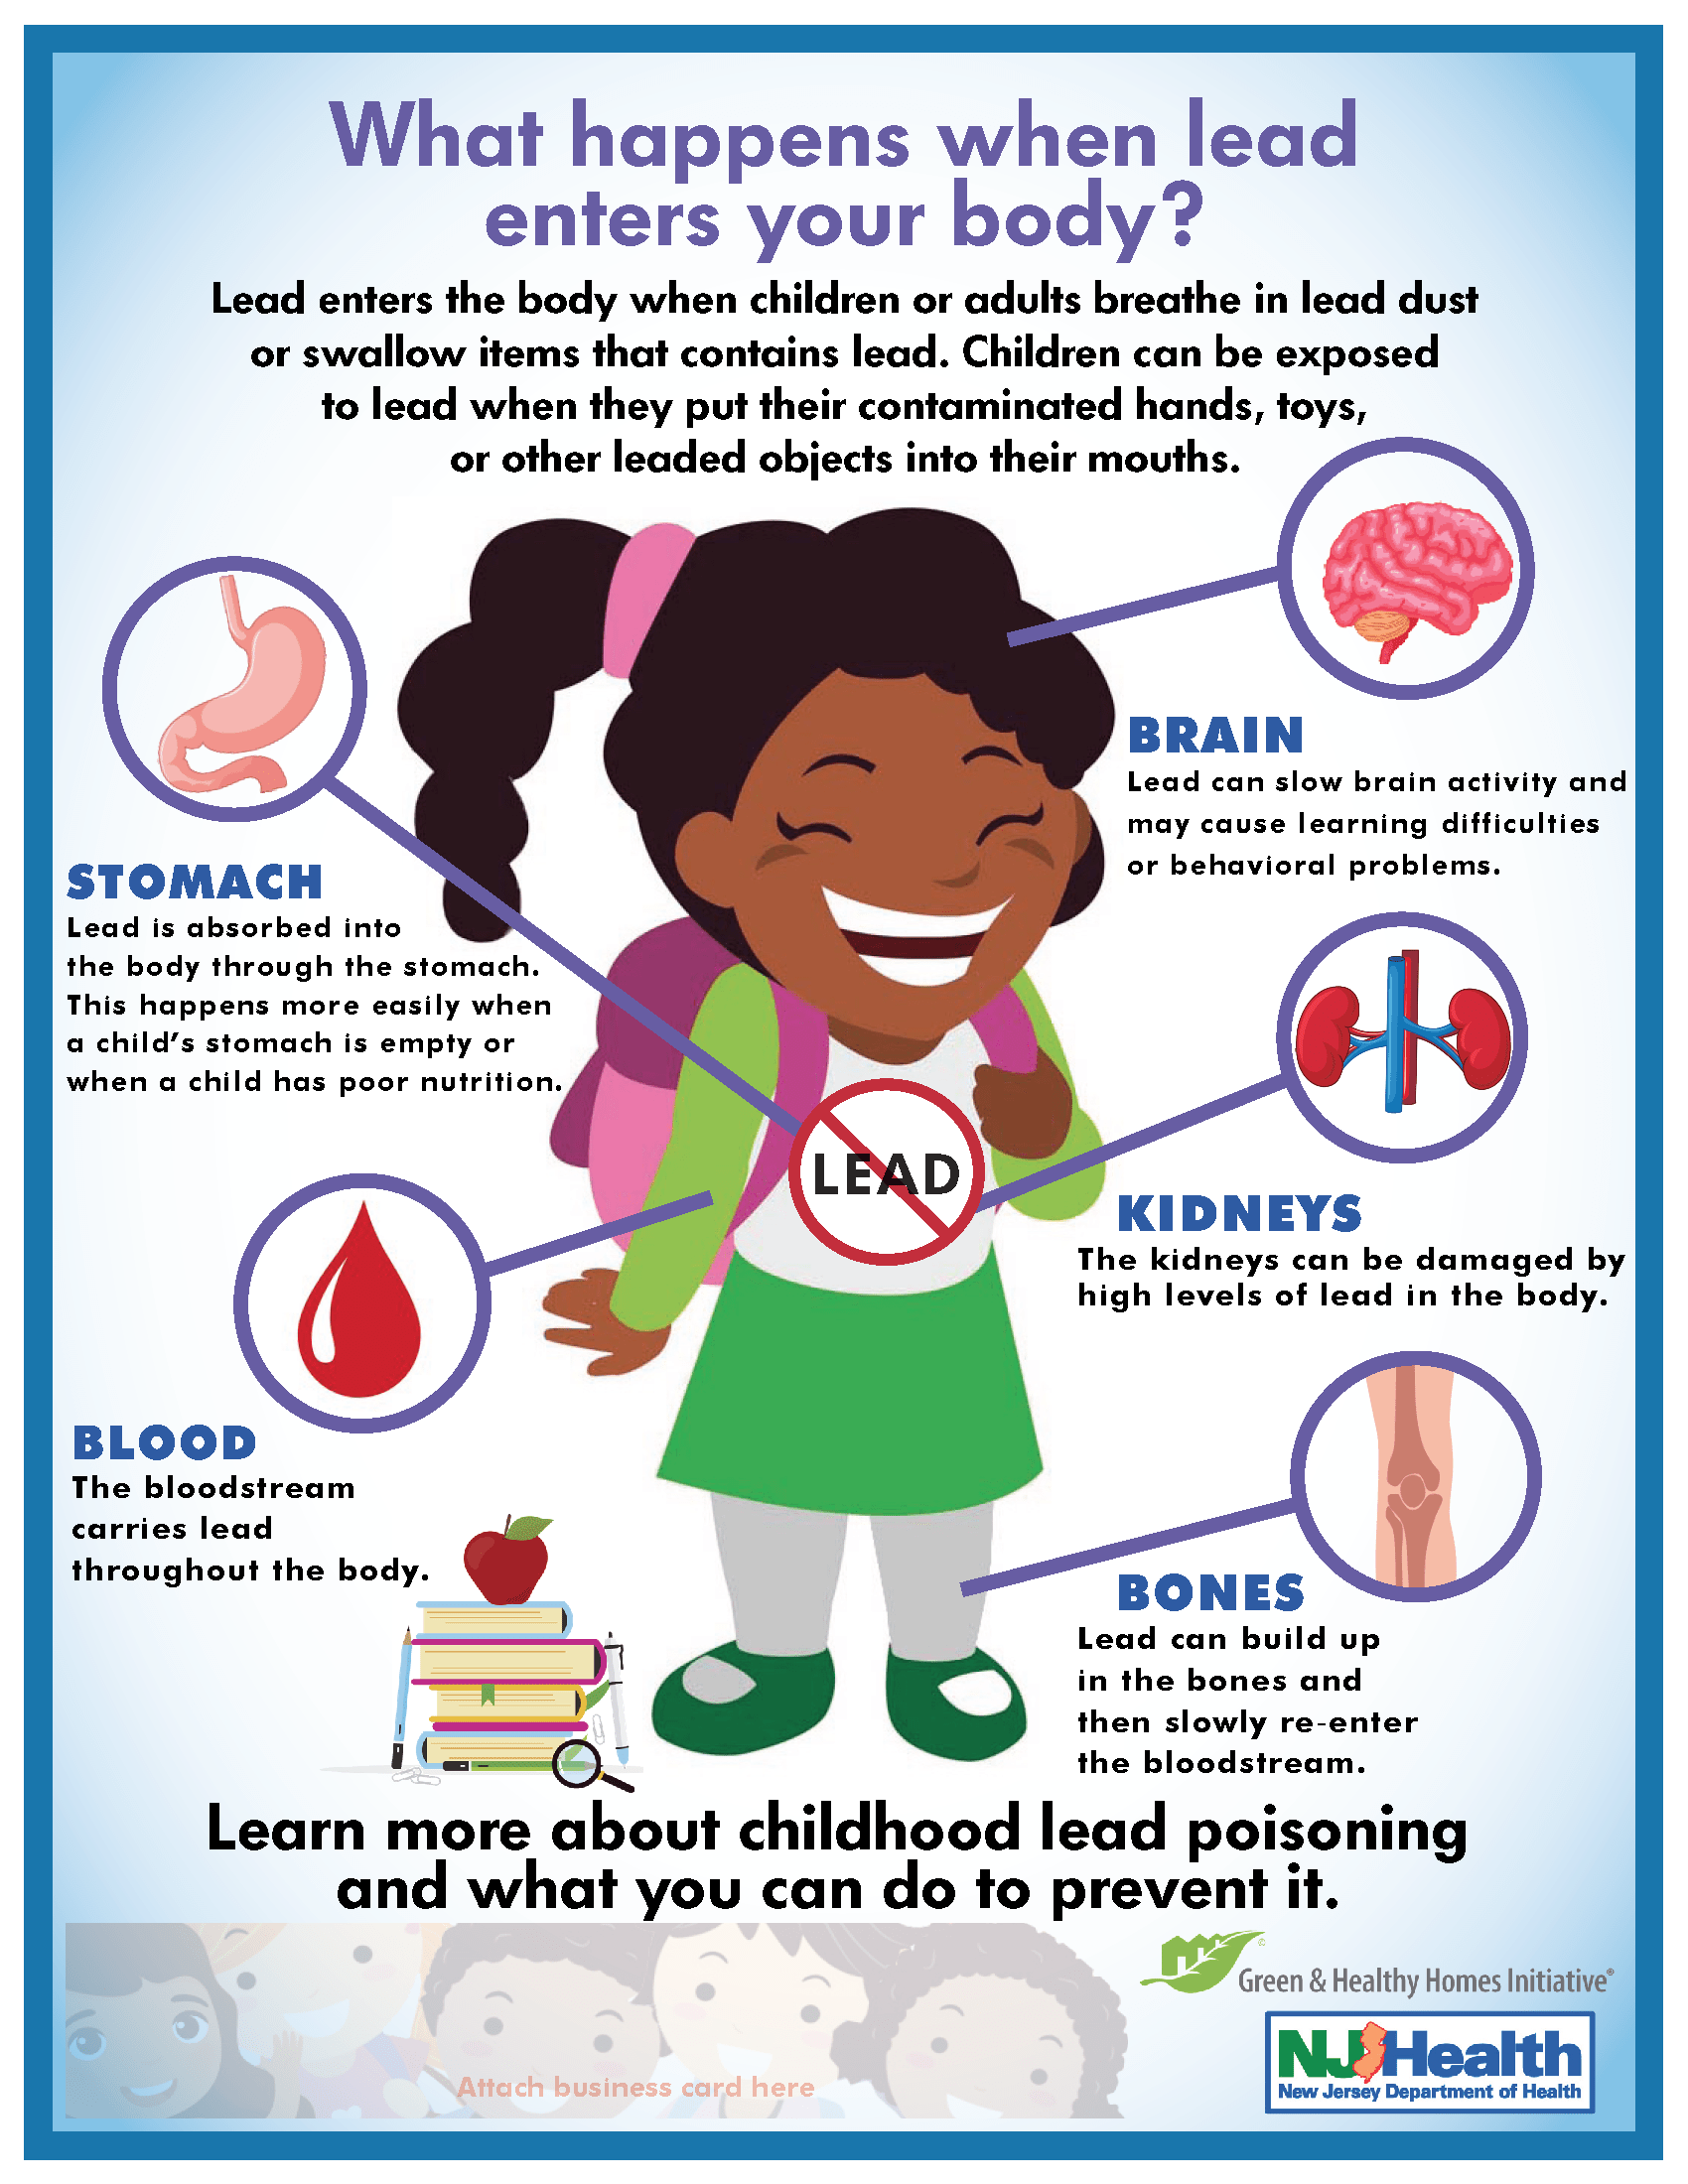 An image of a young girl surrounded by the effects of lead exposure on the body.